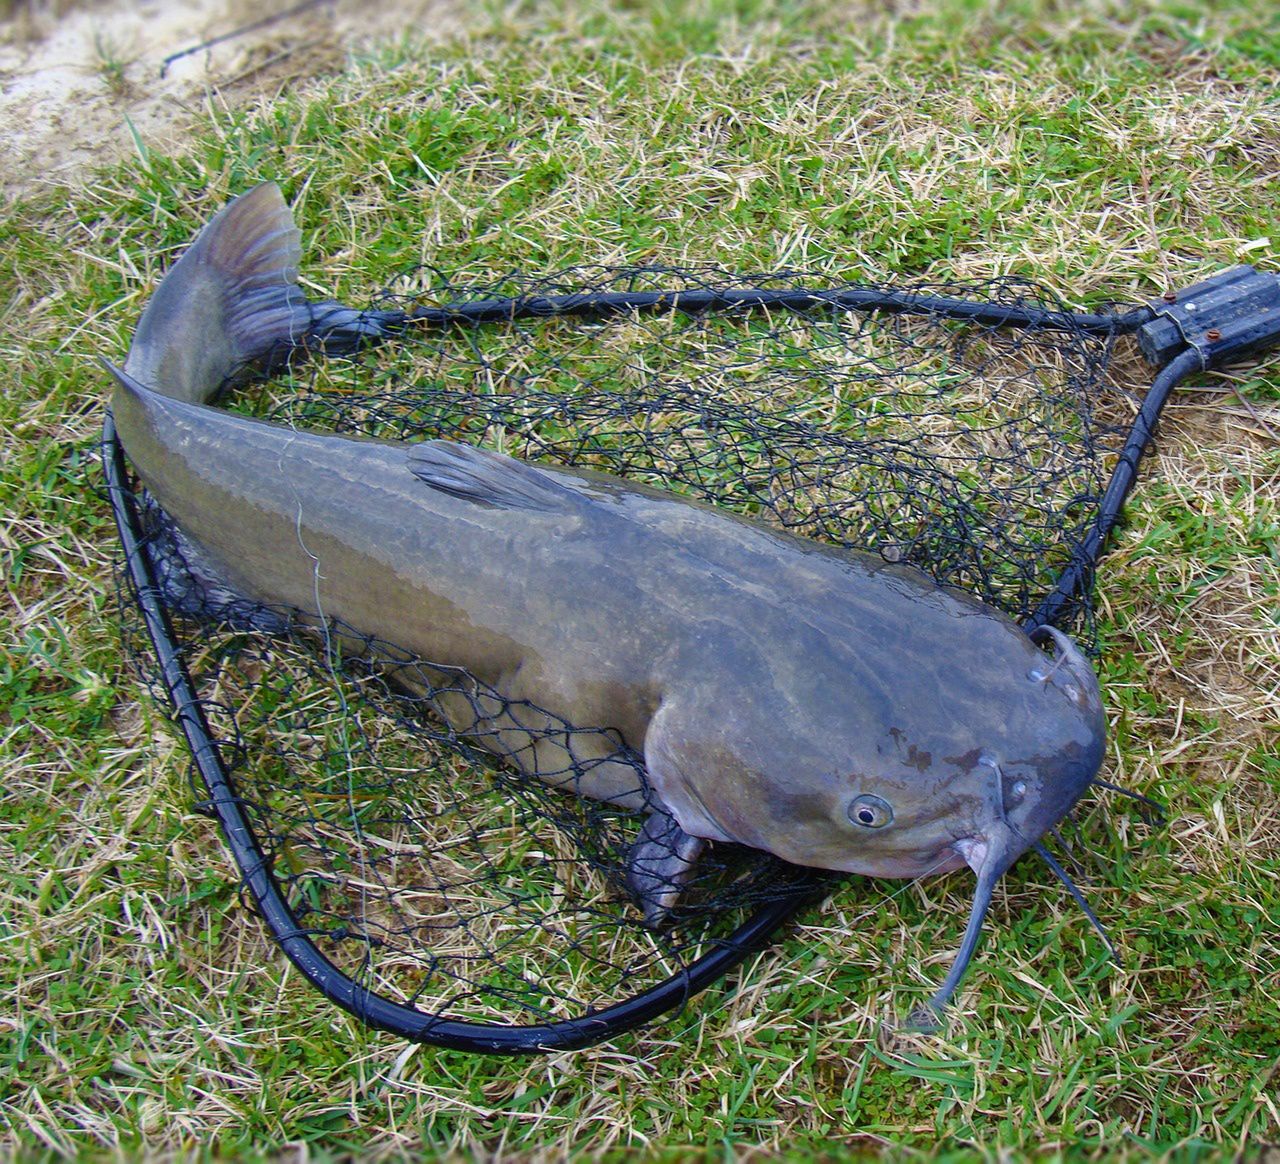 The catfish is the largest freshwater fish in Europe.